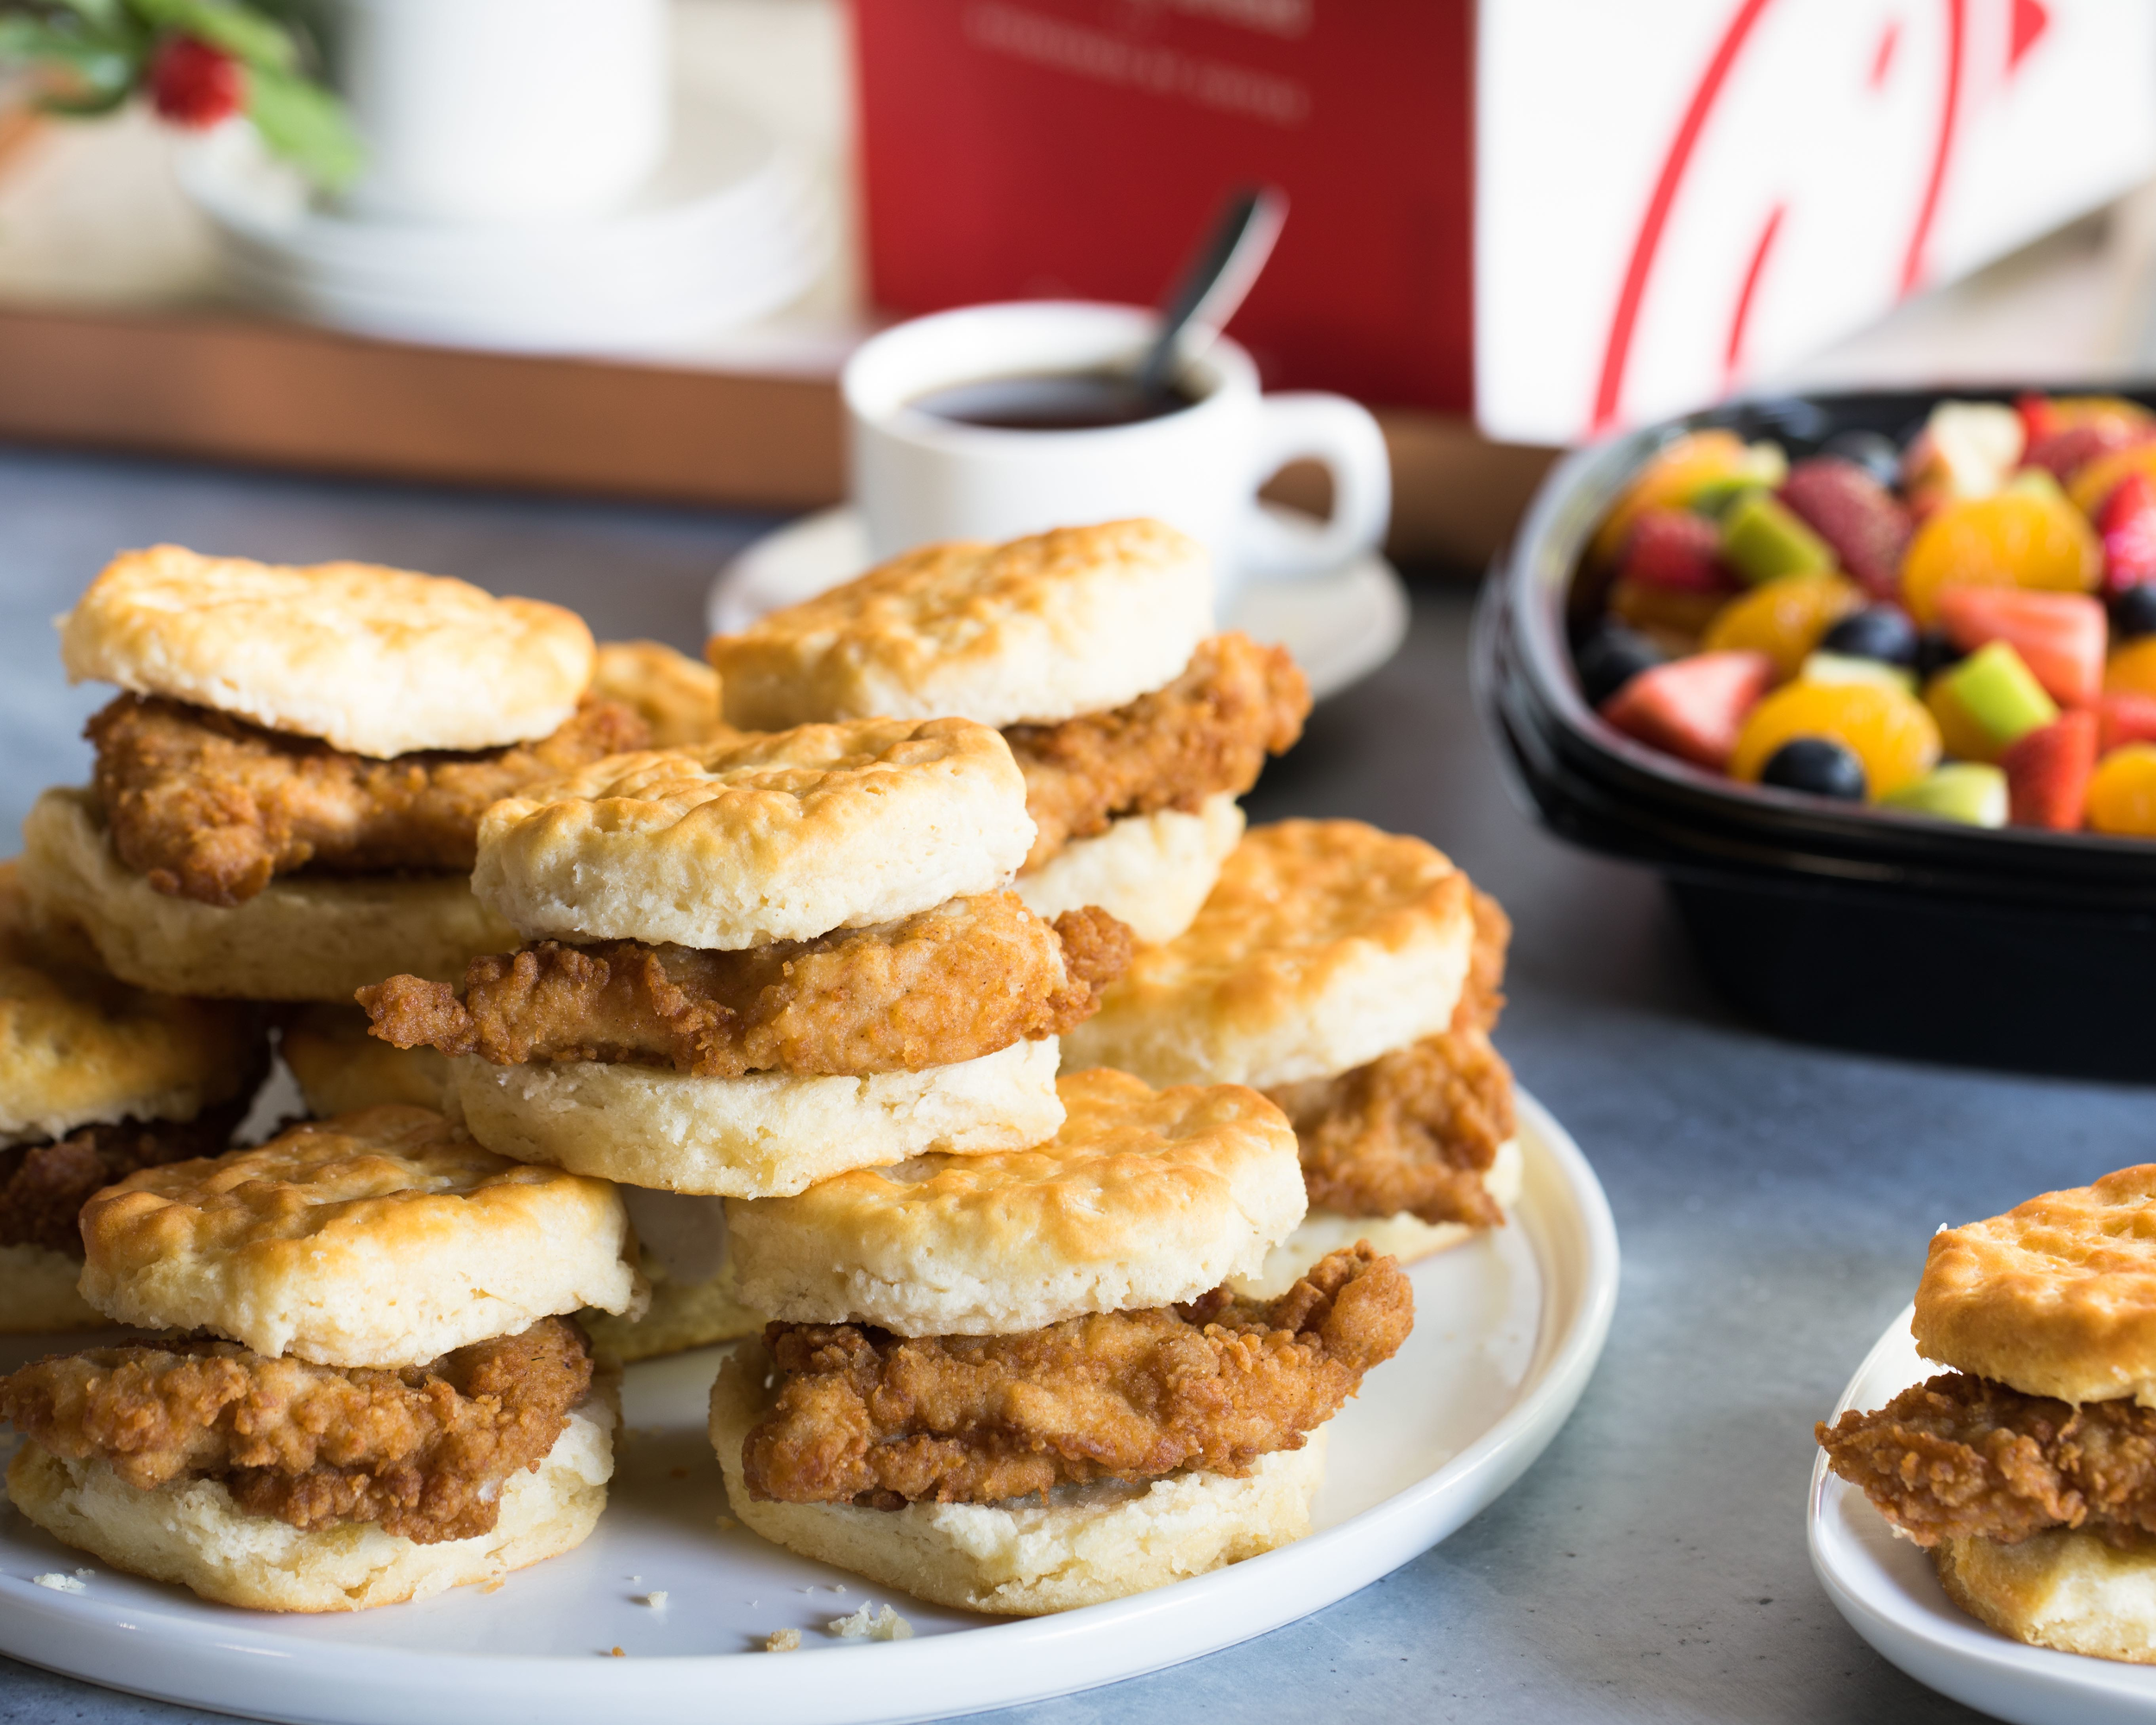 Chick-fil-A Chicken Biscuits with fruit and coffee